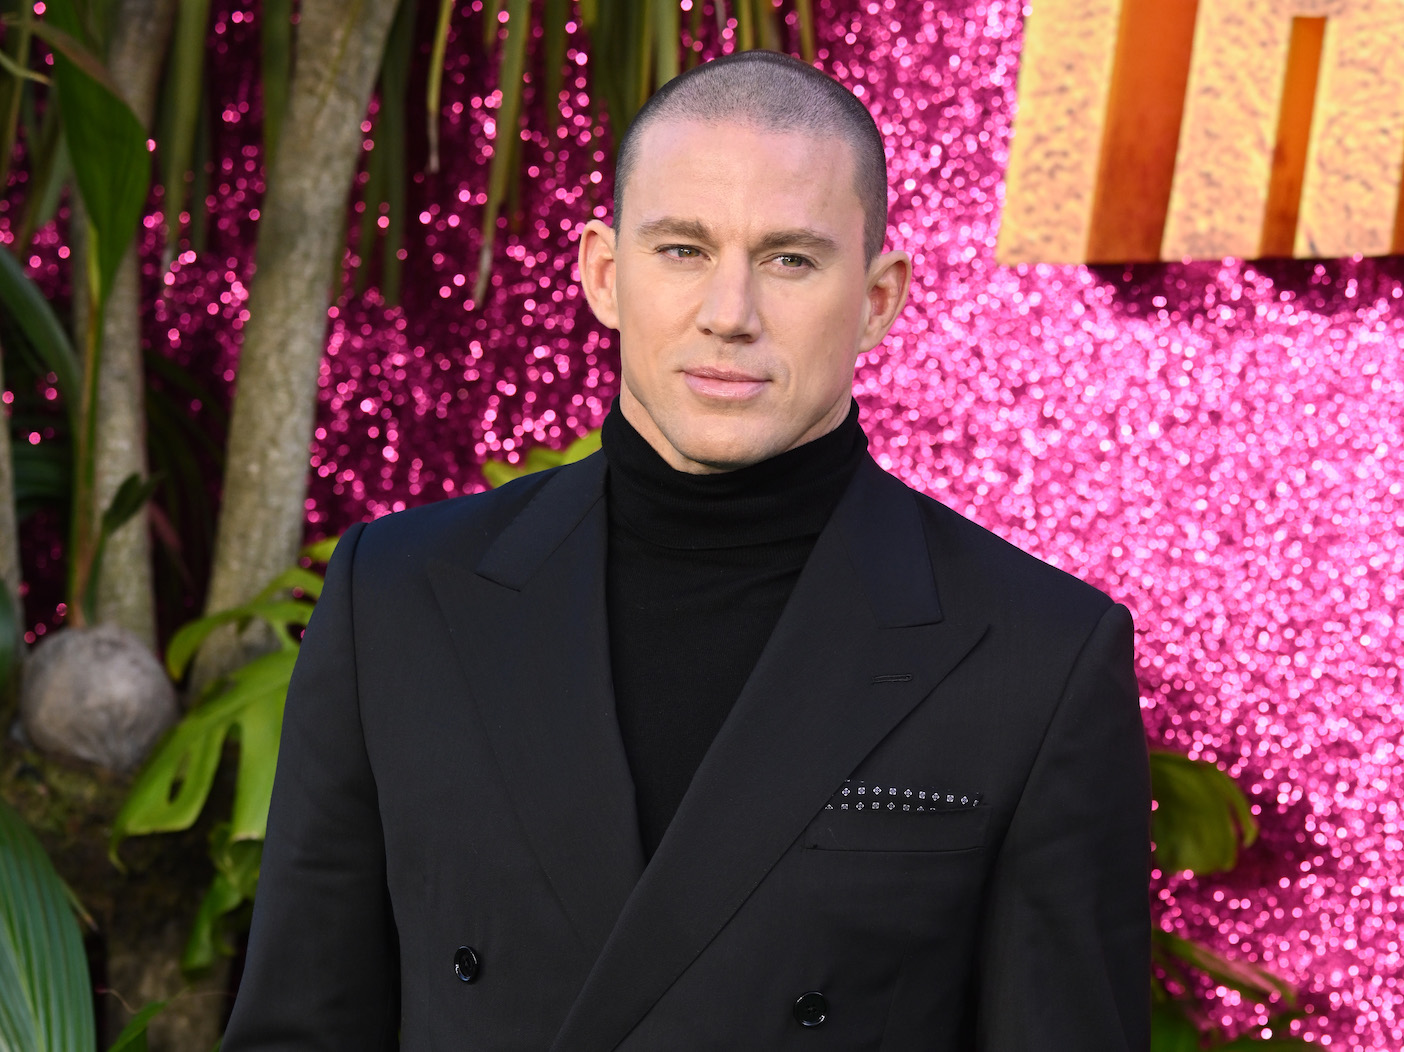 Channing Tatum Allegedly Caught In Public ‘Flirtfest’ With Another Woman, Dubious Gossip Claims